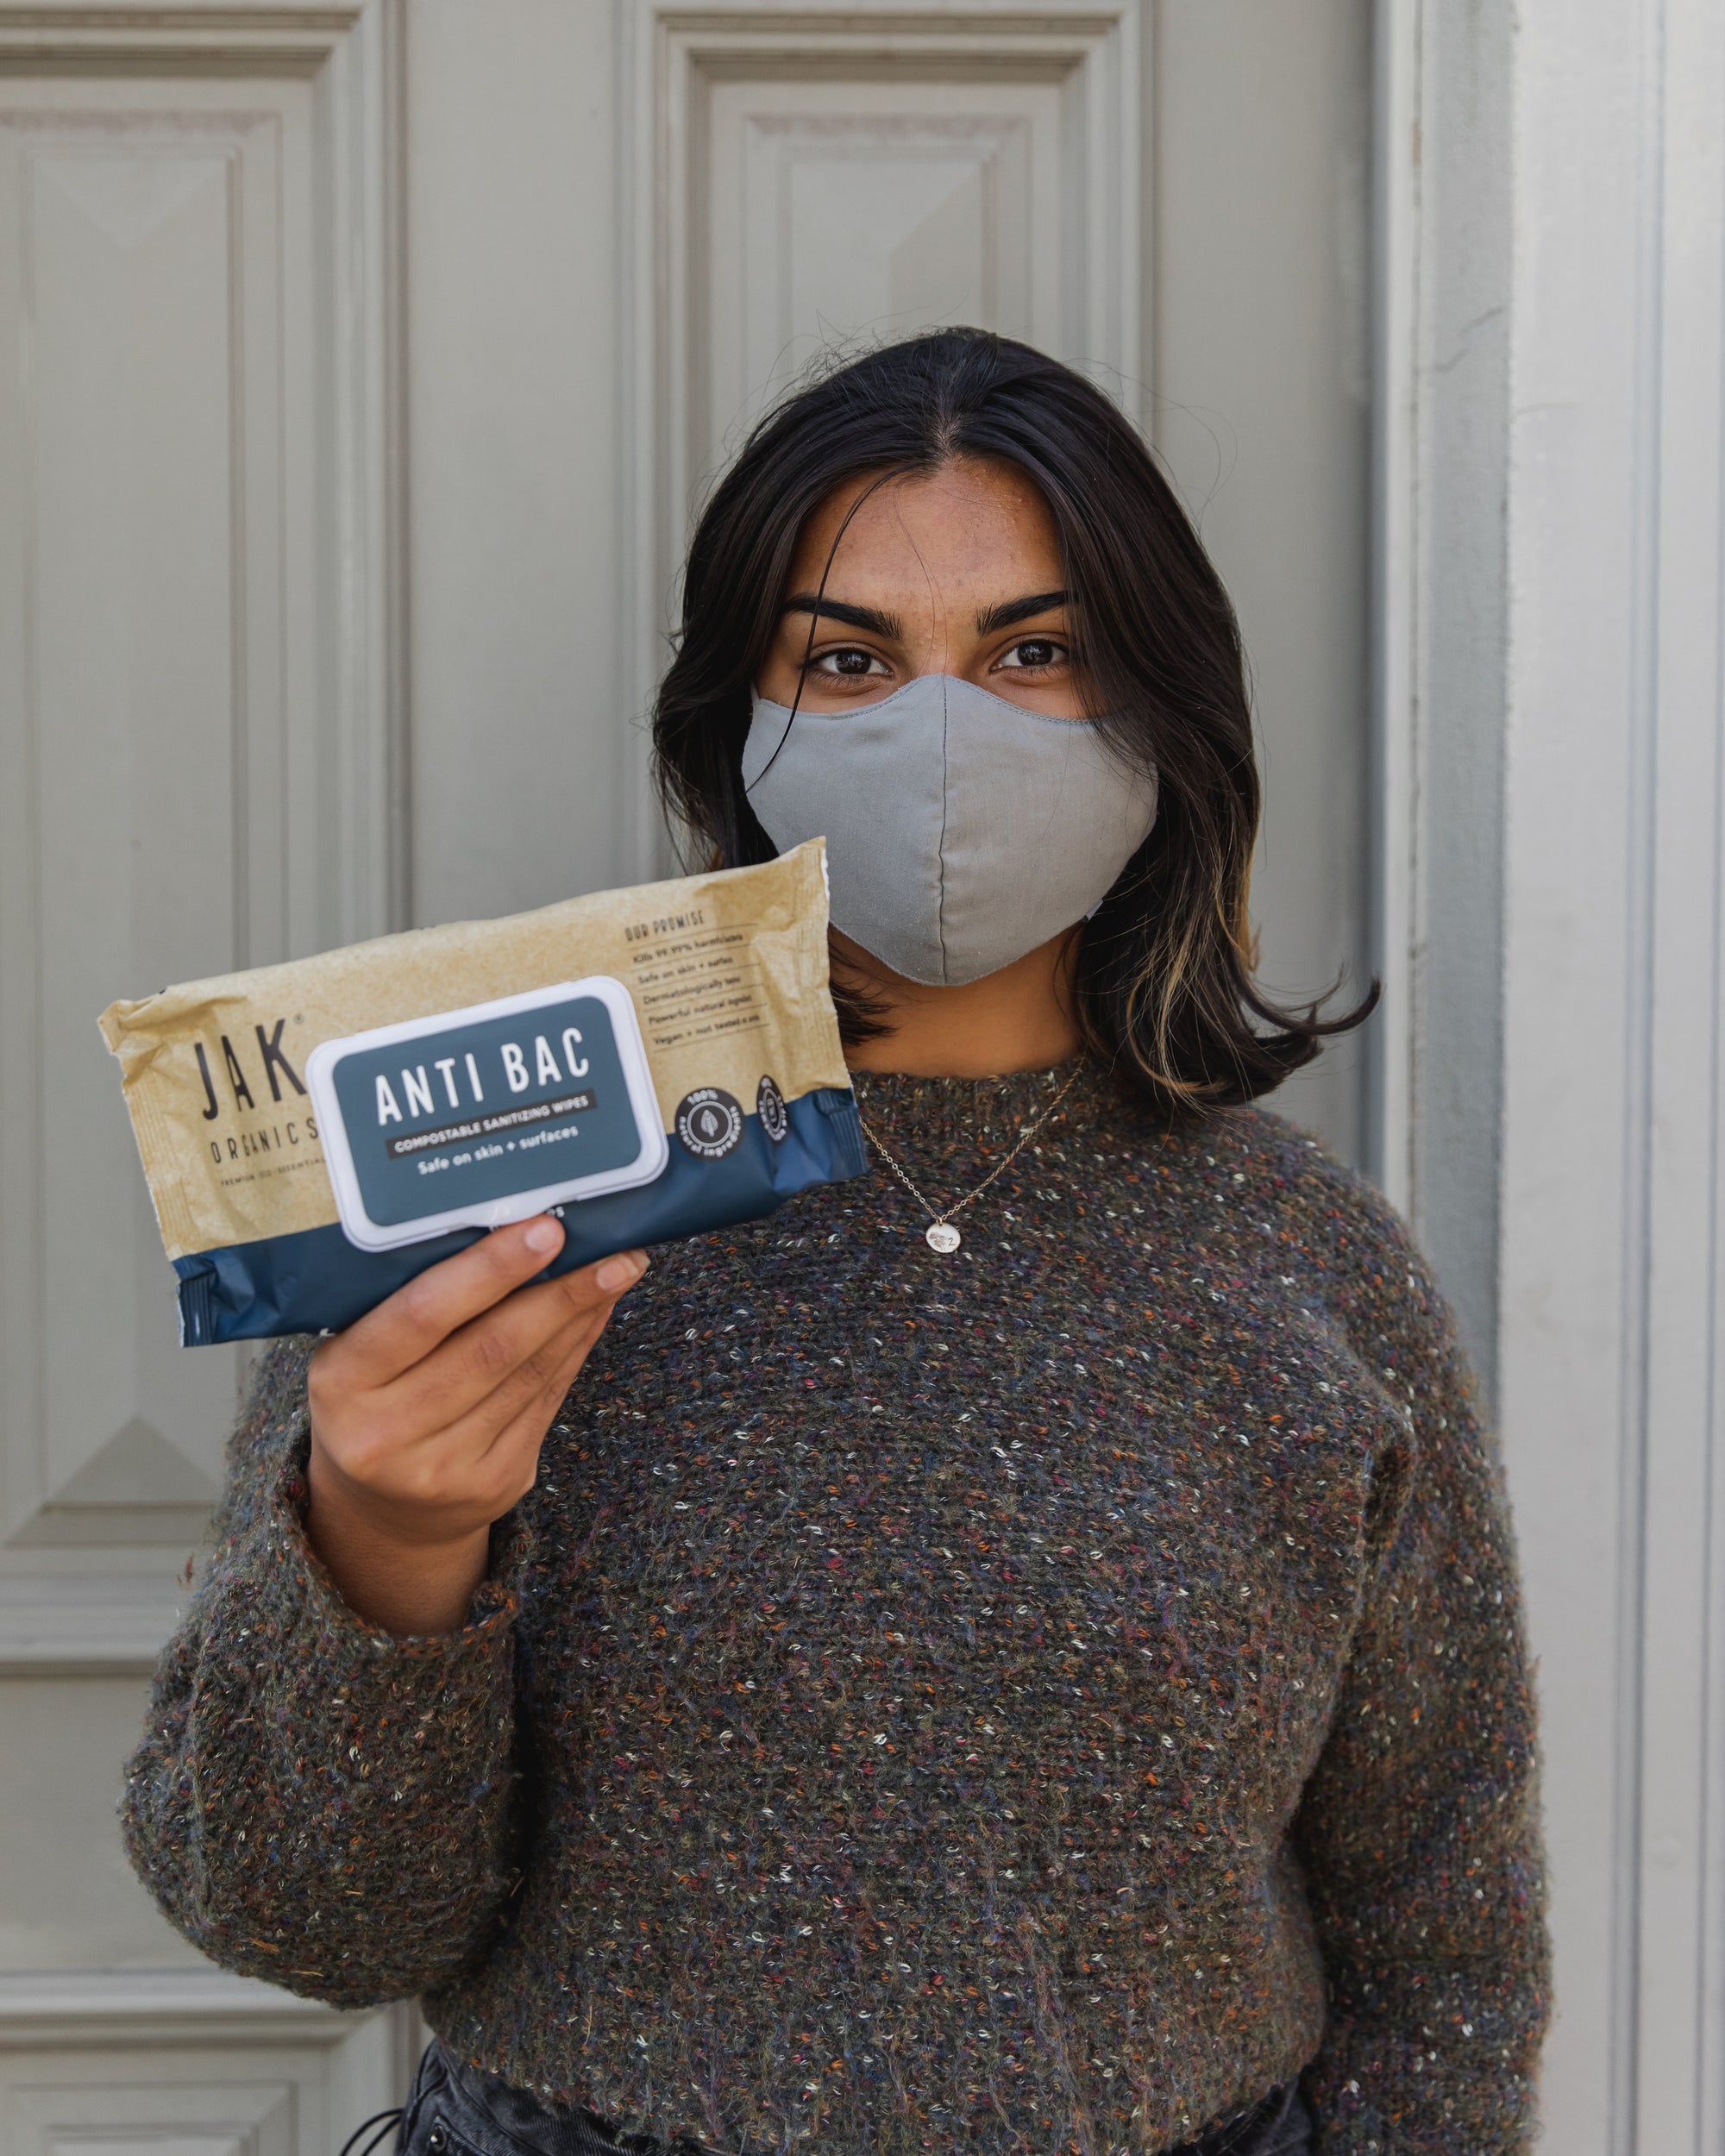 SOLD OUT : ANTI-BAC | All-Natural Compostable Sanitising Wipes | SINGLE Pack